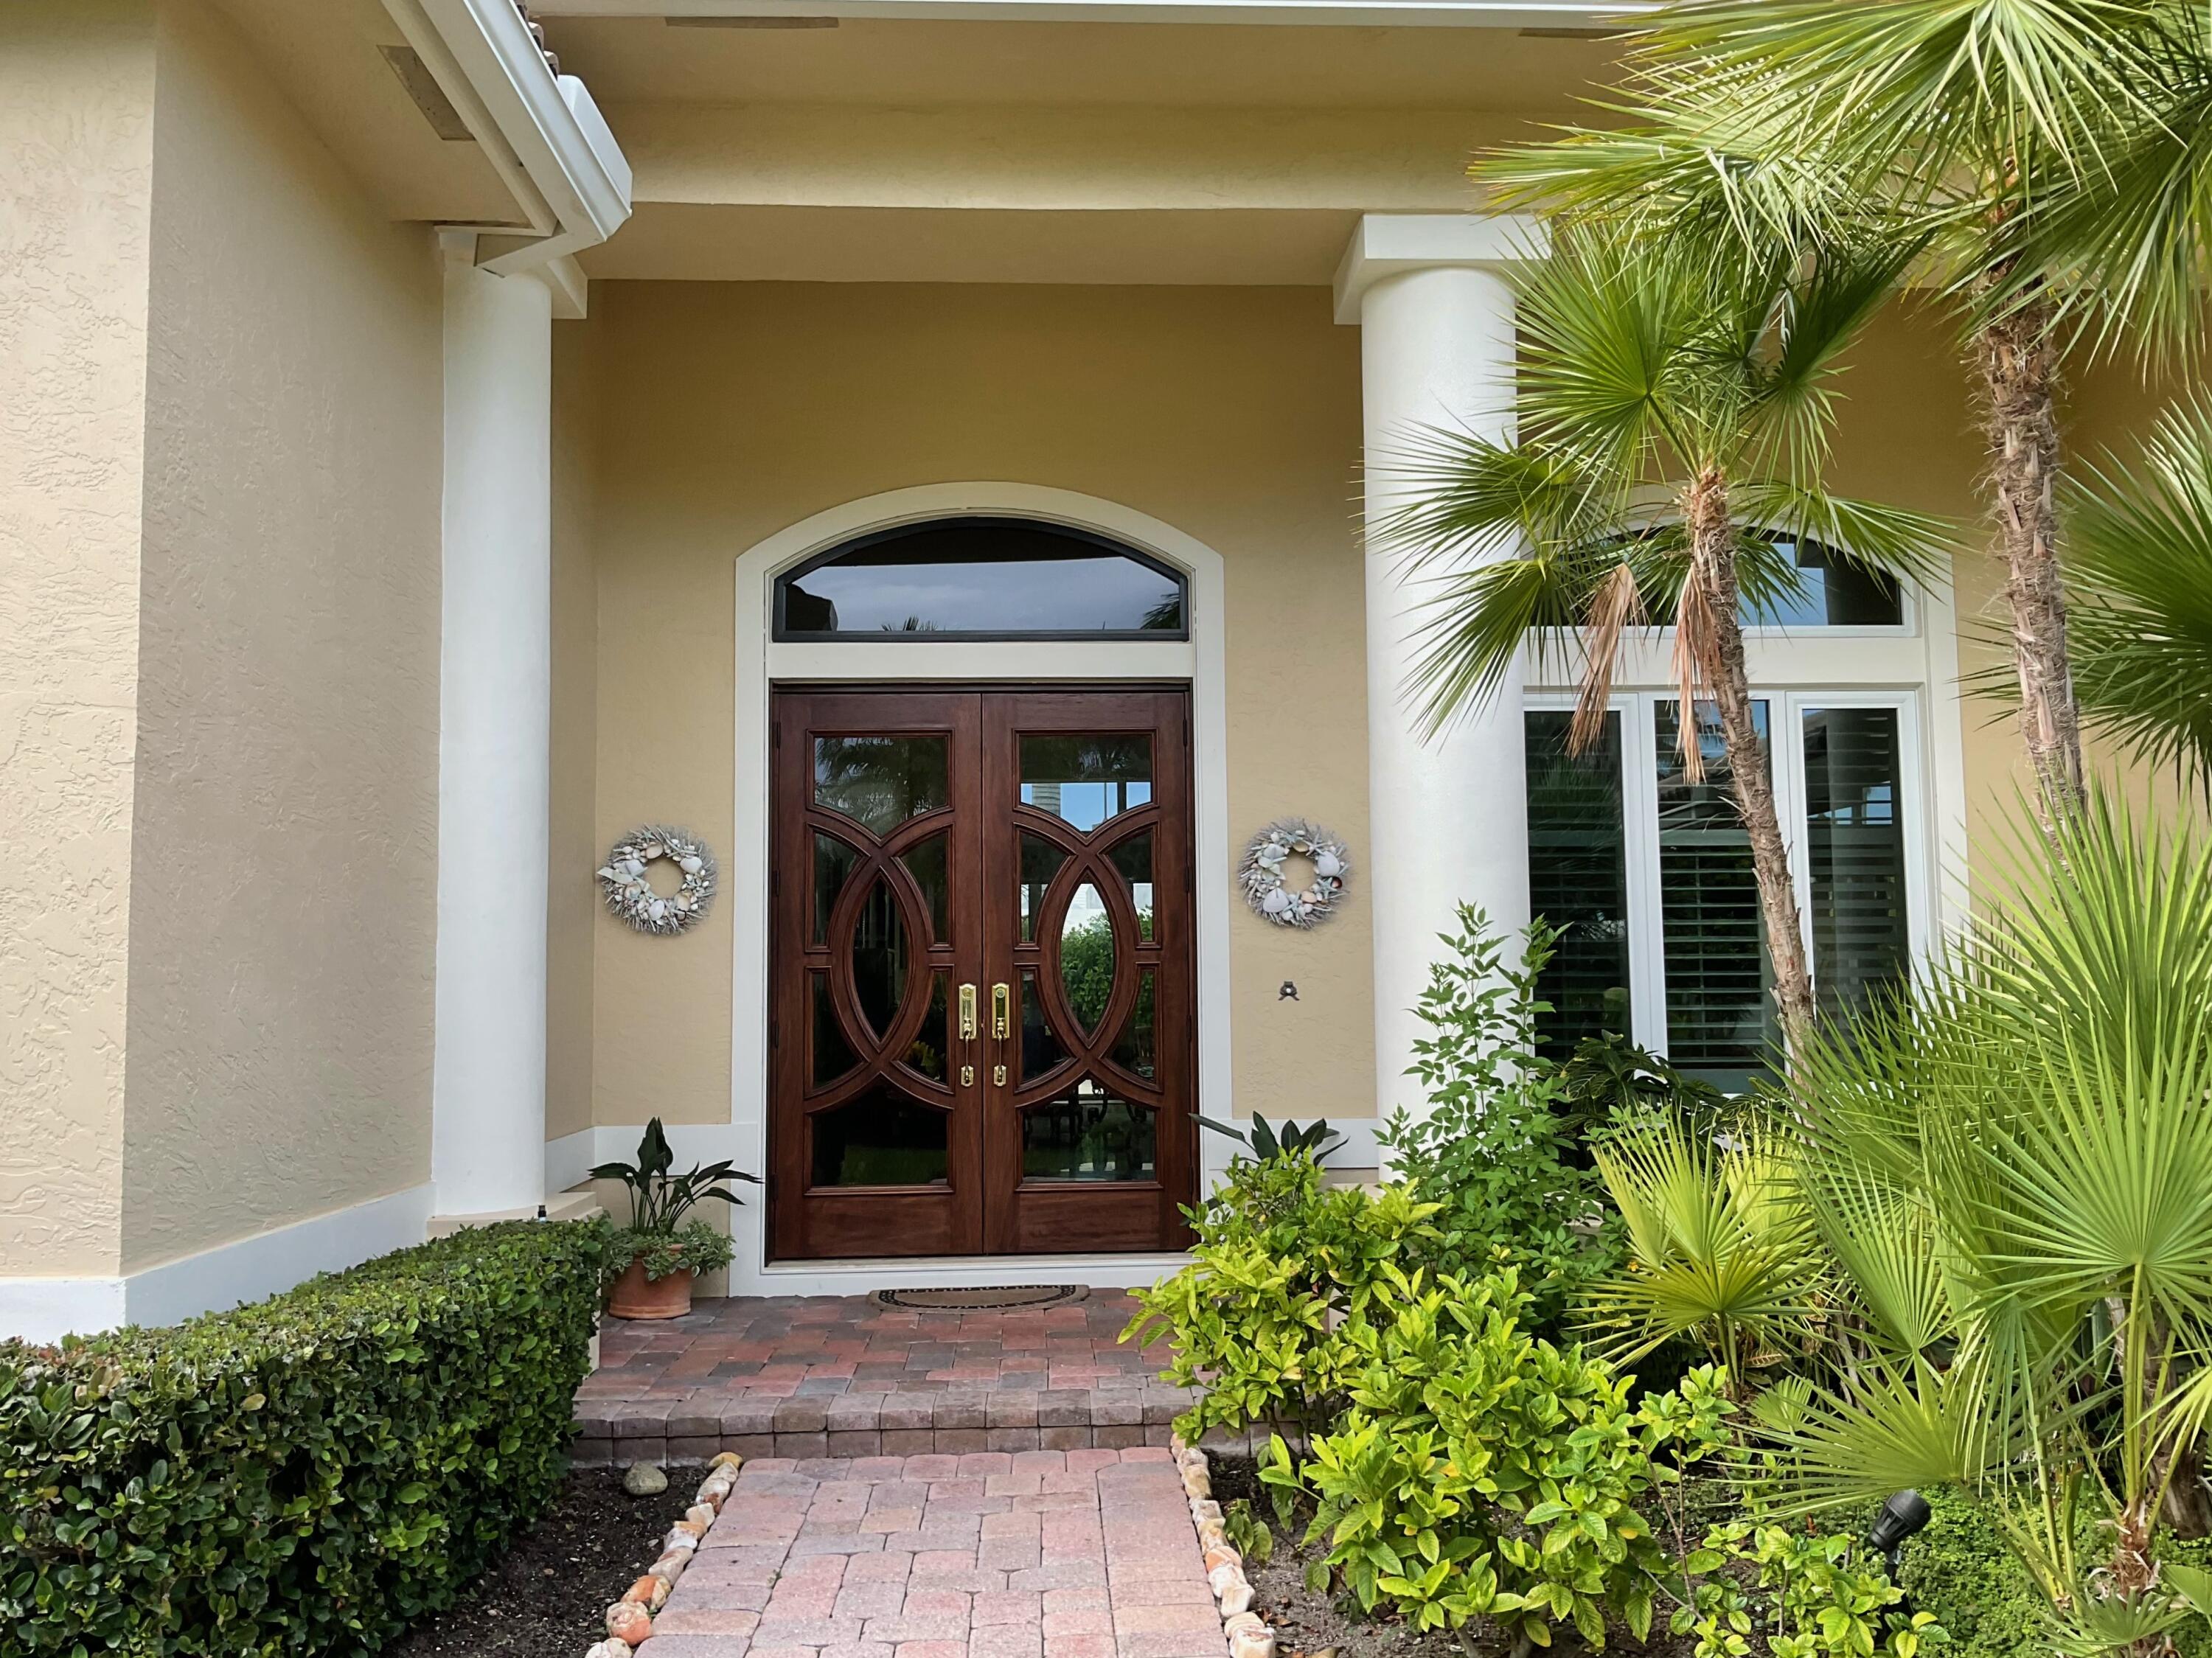 Call this pristine gem your home in much sought-after Jupiter Inlet Colony.This 3 or 4 Bedroom, 4 Bathroom home was significantly remodeled. Featuring 14 ft ceilings w triple crown moldings, oversized Master Bedroom overlooking pool & patio, large updated Master Bath, a wood paneled office, updated kitchen with quartz countertops, family room w bookshelves and surround sound leading out to patio and pool - perfect for entertaining friends and family.  The second floor features two large bedrooms plus loft and 2 full baths. Deeded Beach Access with entrance to the beach only steps away.  Updates include: New Roof, Impact Windows & Doors installed in 2021. Kitchen & Bath renovated in 2022. Outdoor living area & heated pool renovated in 2019. Membership available to Jupiter Inlet Beach Club